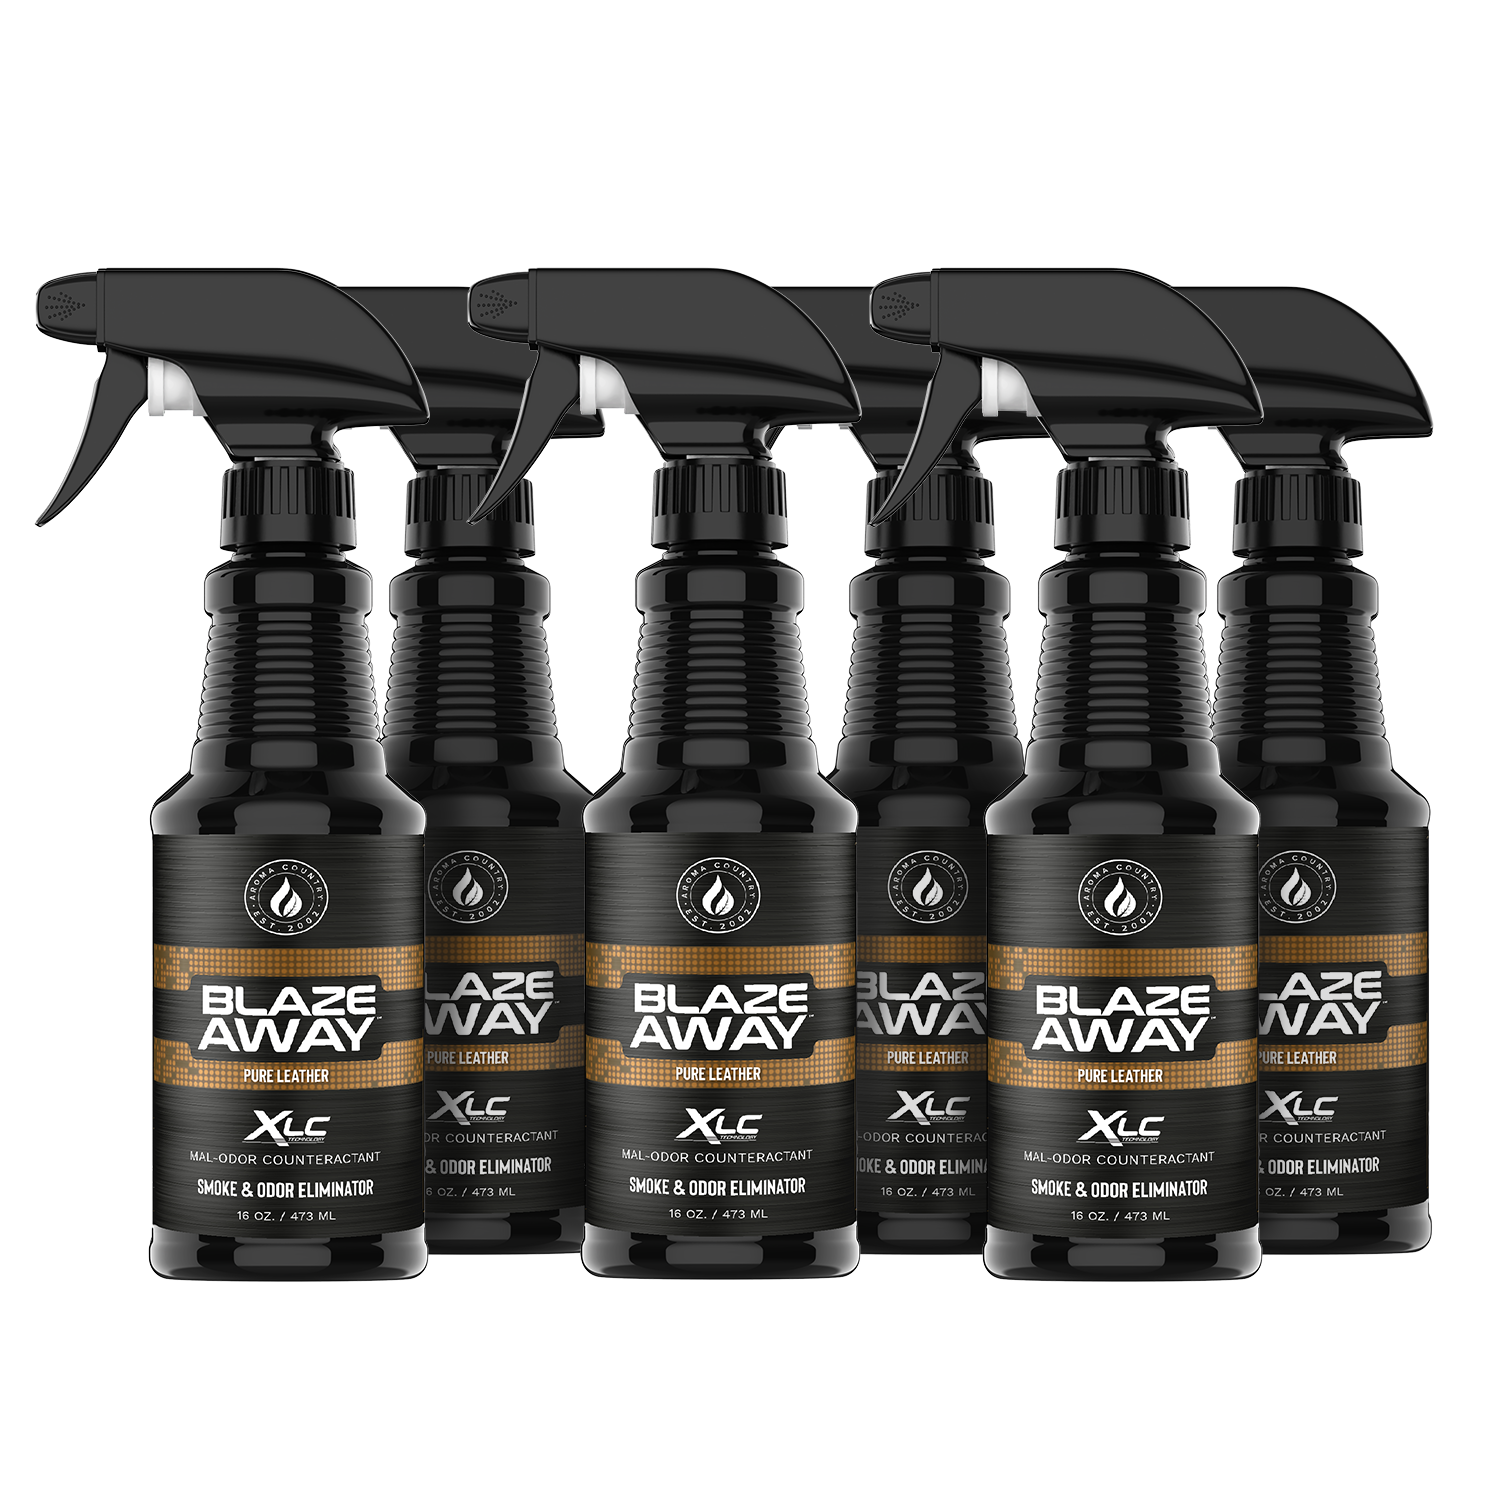 16 ounce 6 pack of Pure Leather Smoke and Odor Eliminator.